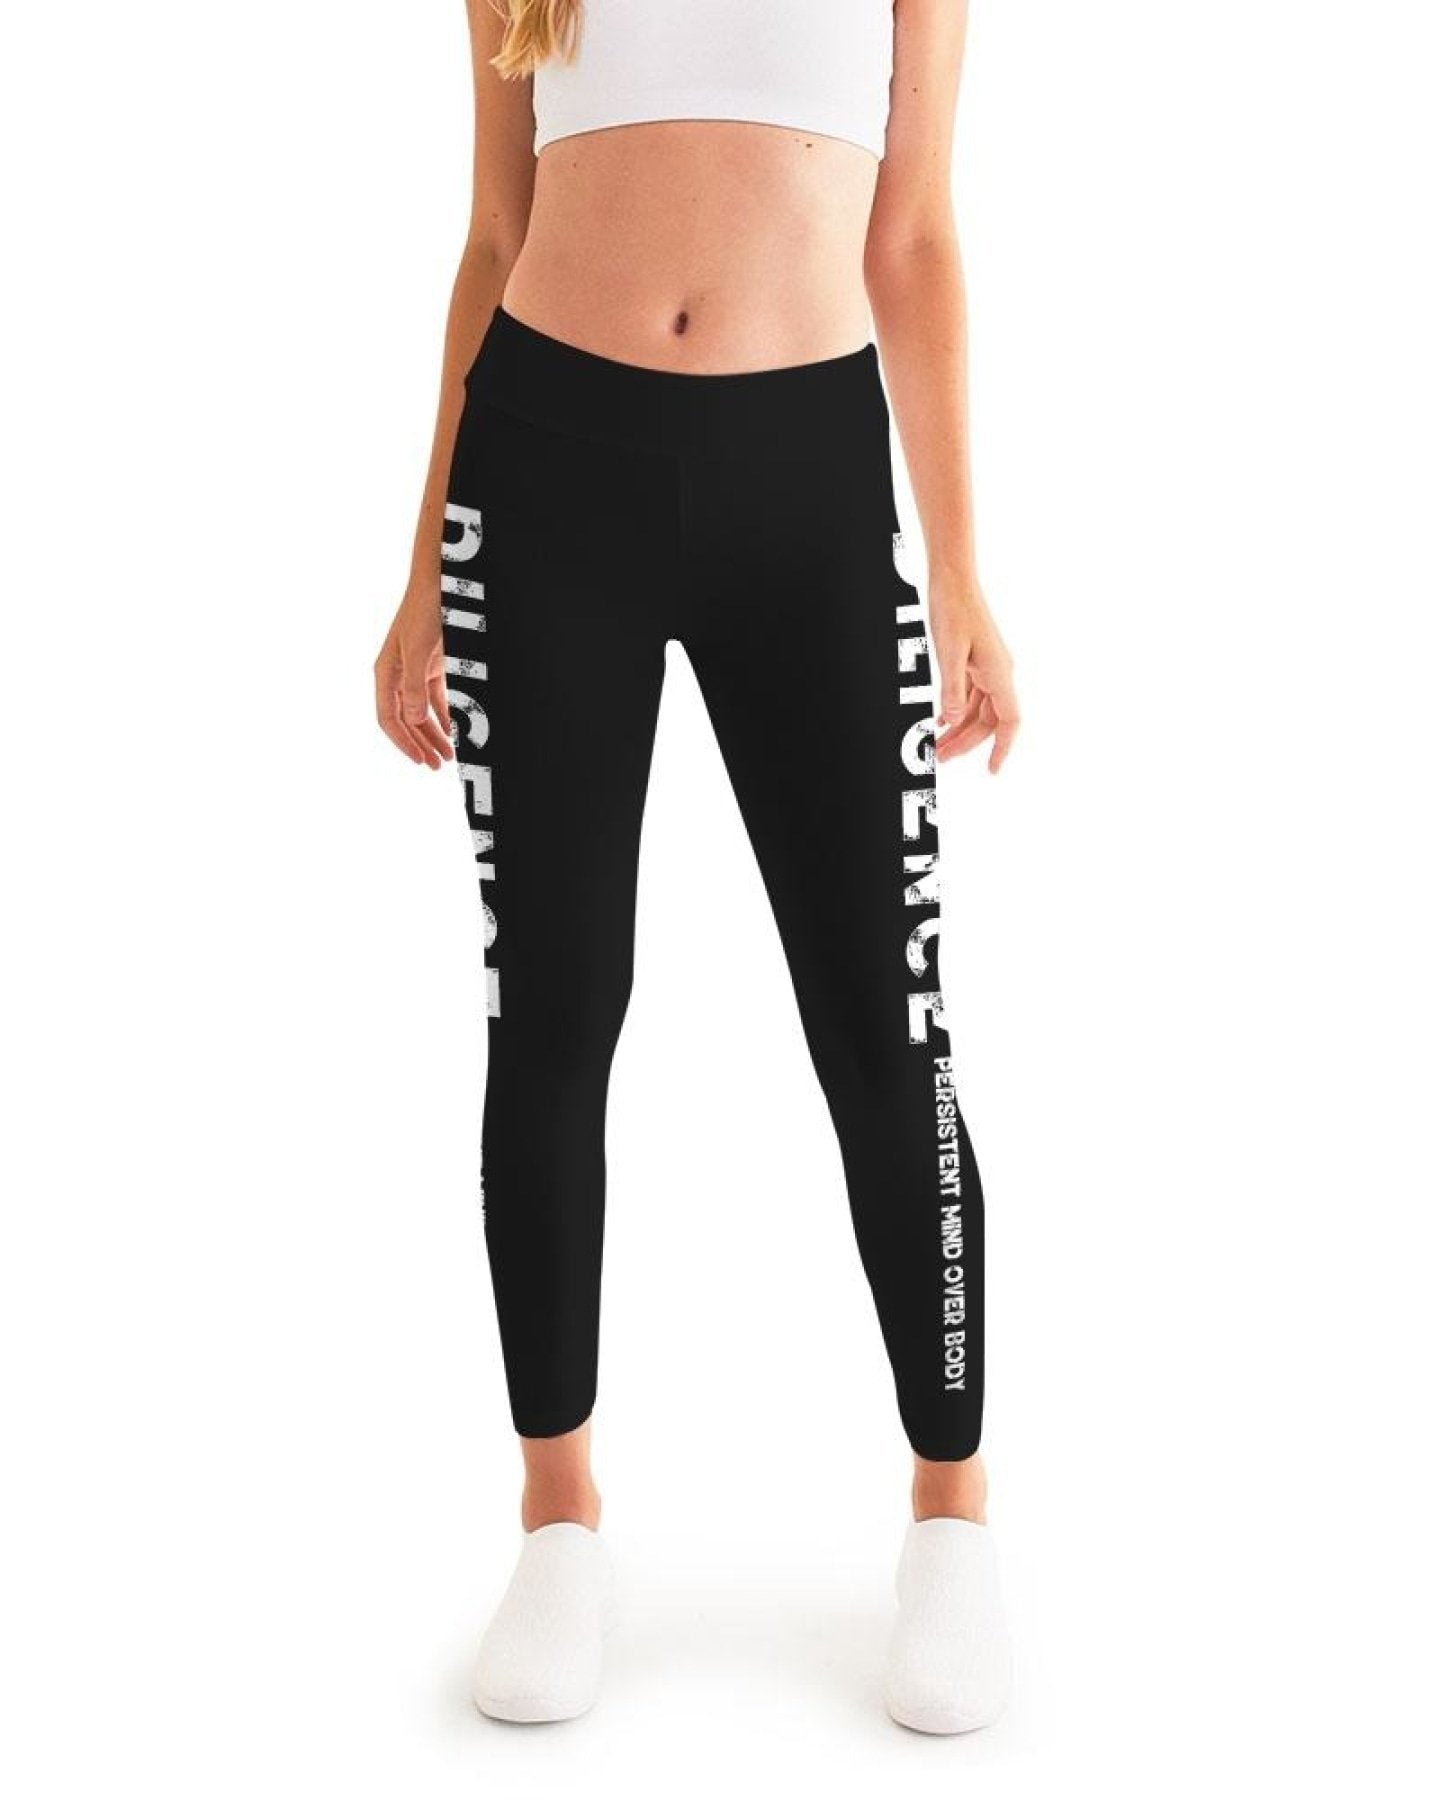 Diligence, Persistent Mind Over Body Graphic Style Womens Leggings